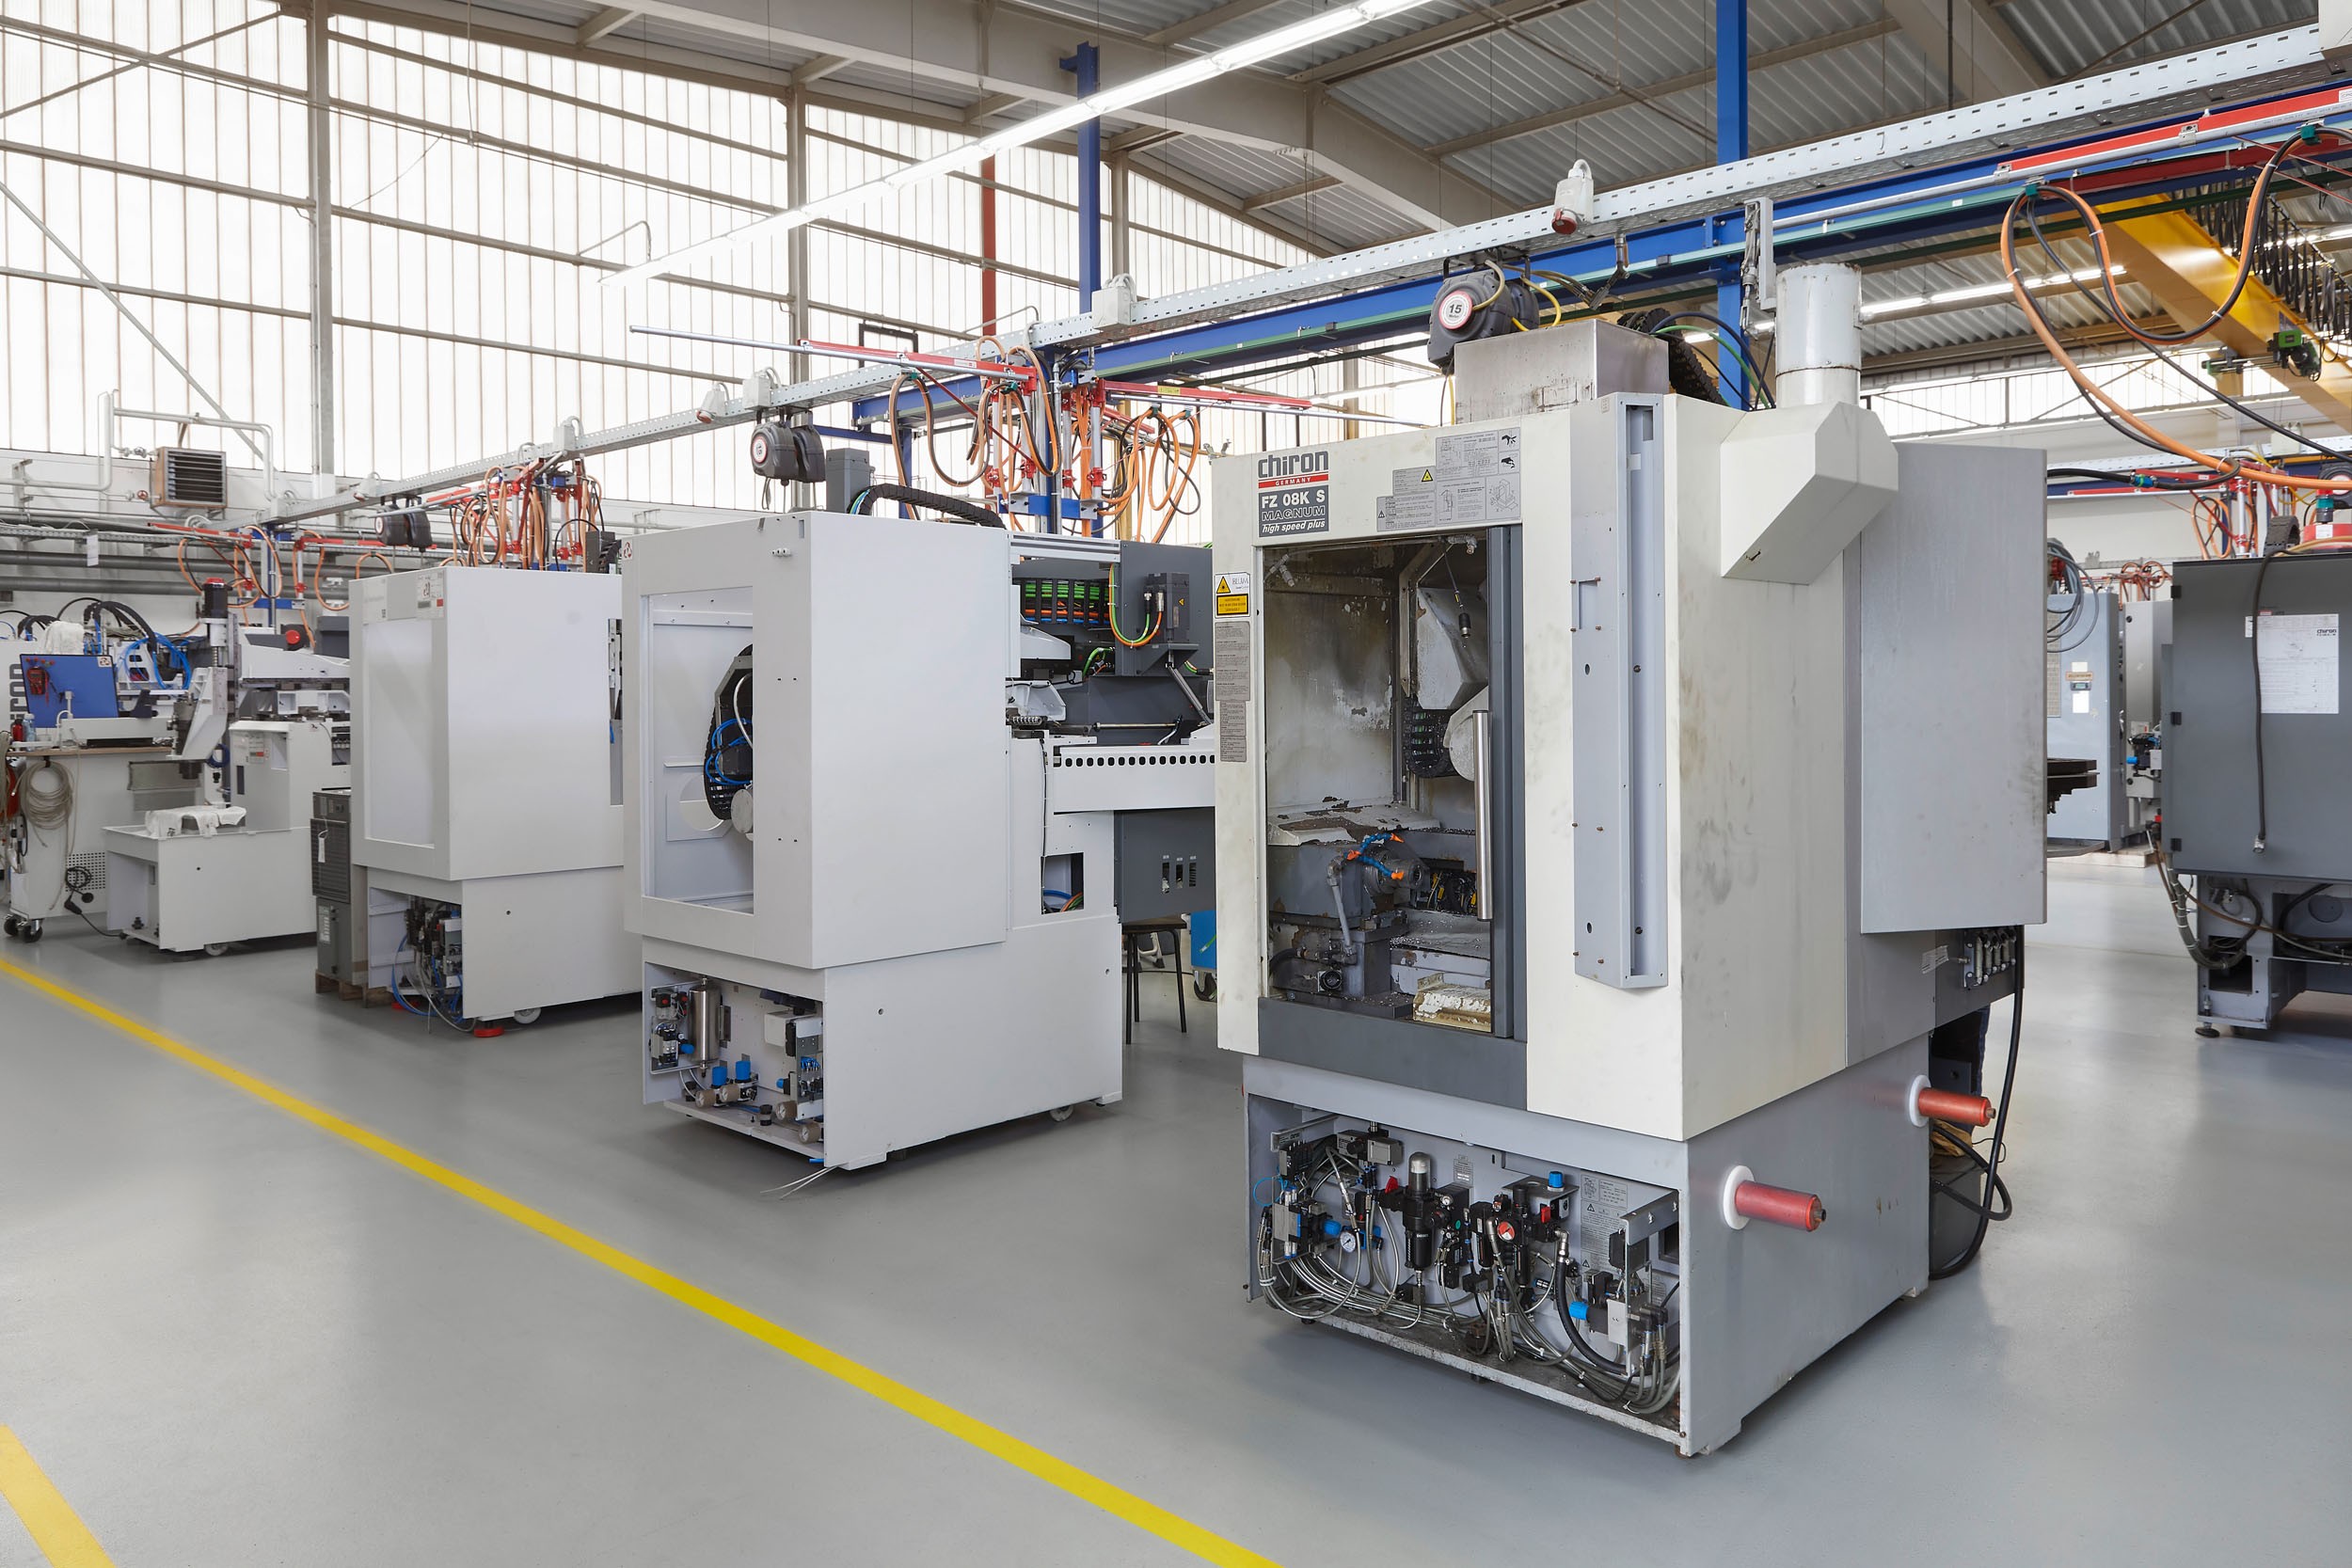 One by one: In just twelve weeks, the customer will receive a total of six machining centers, fully upgraded to state-of-the-art standards, ready to resume operation at their manufacturing facilities.